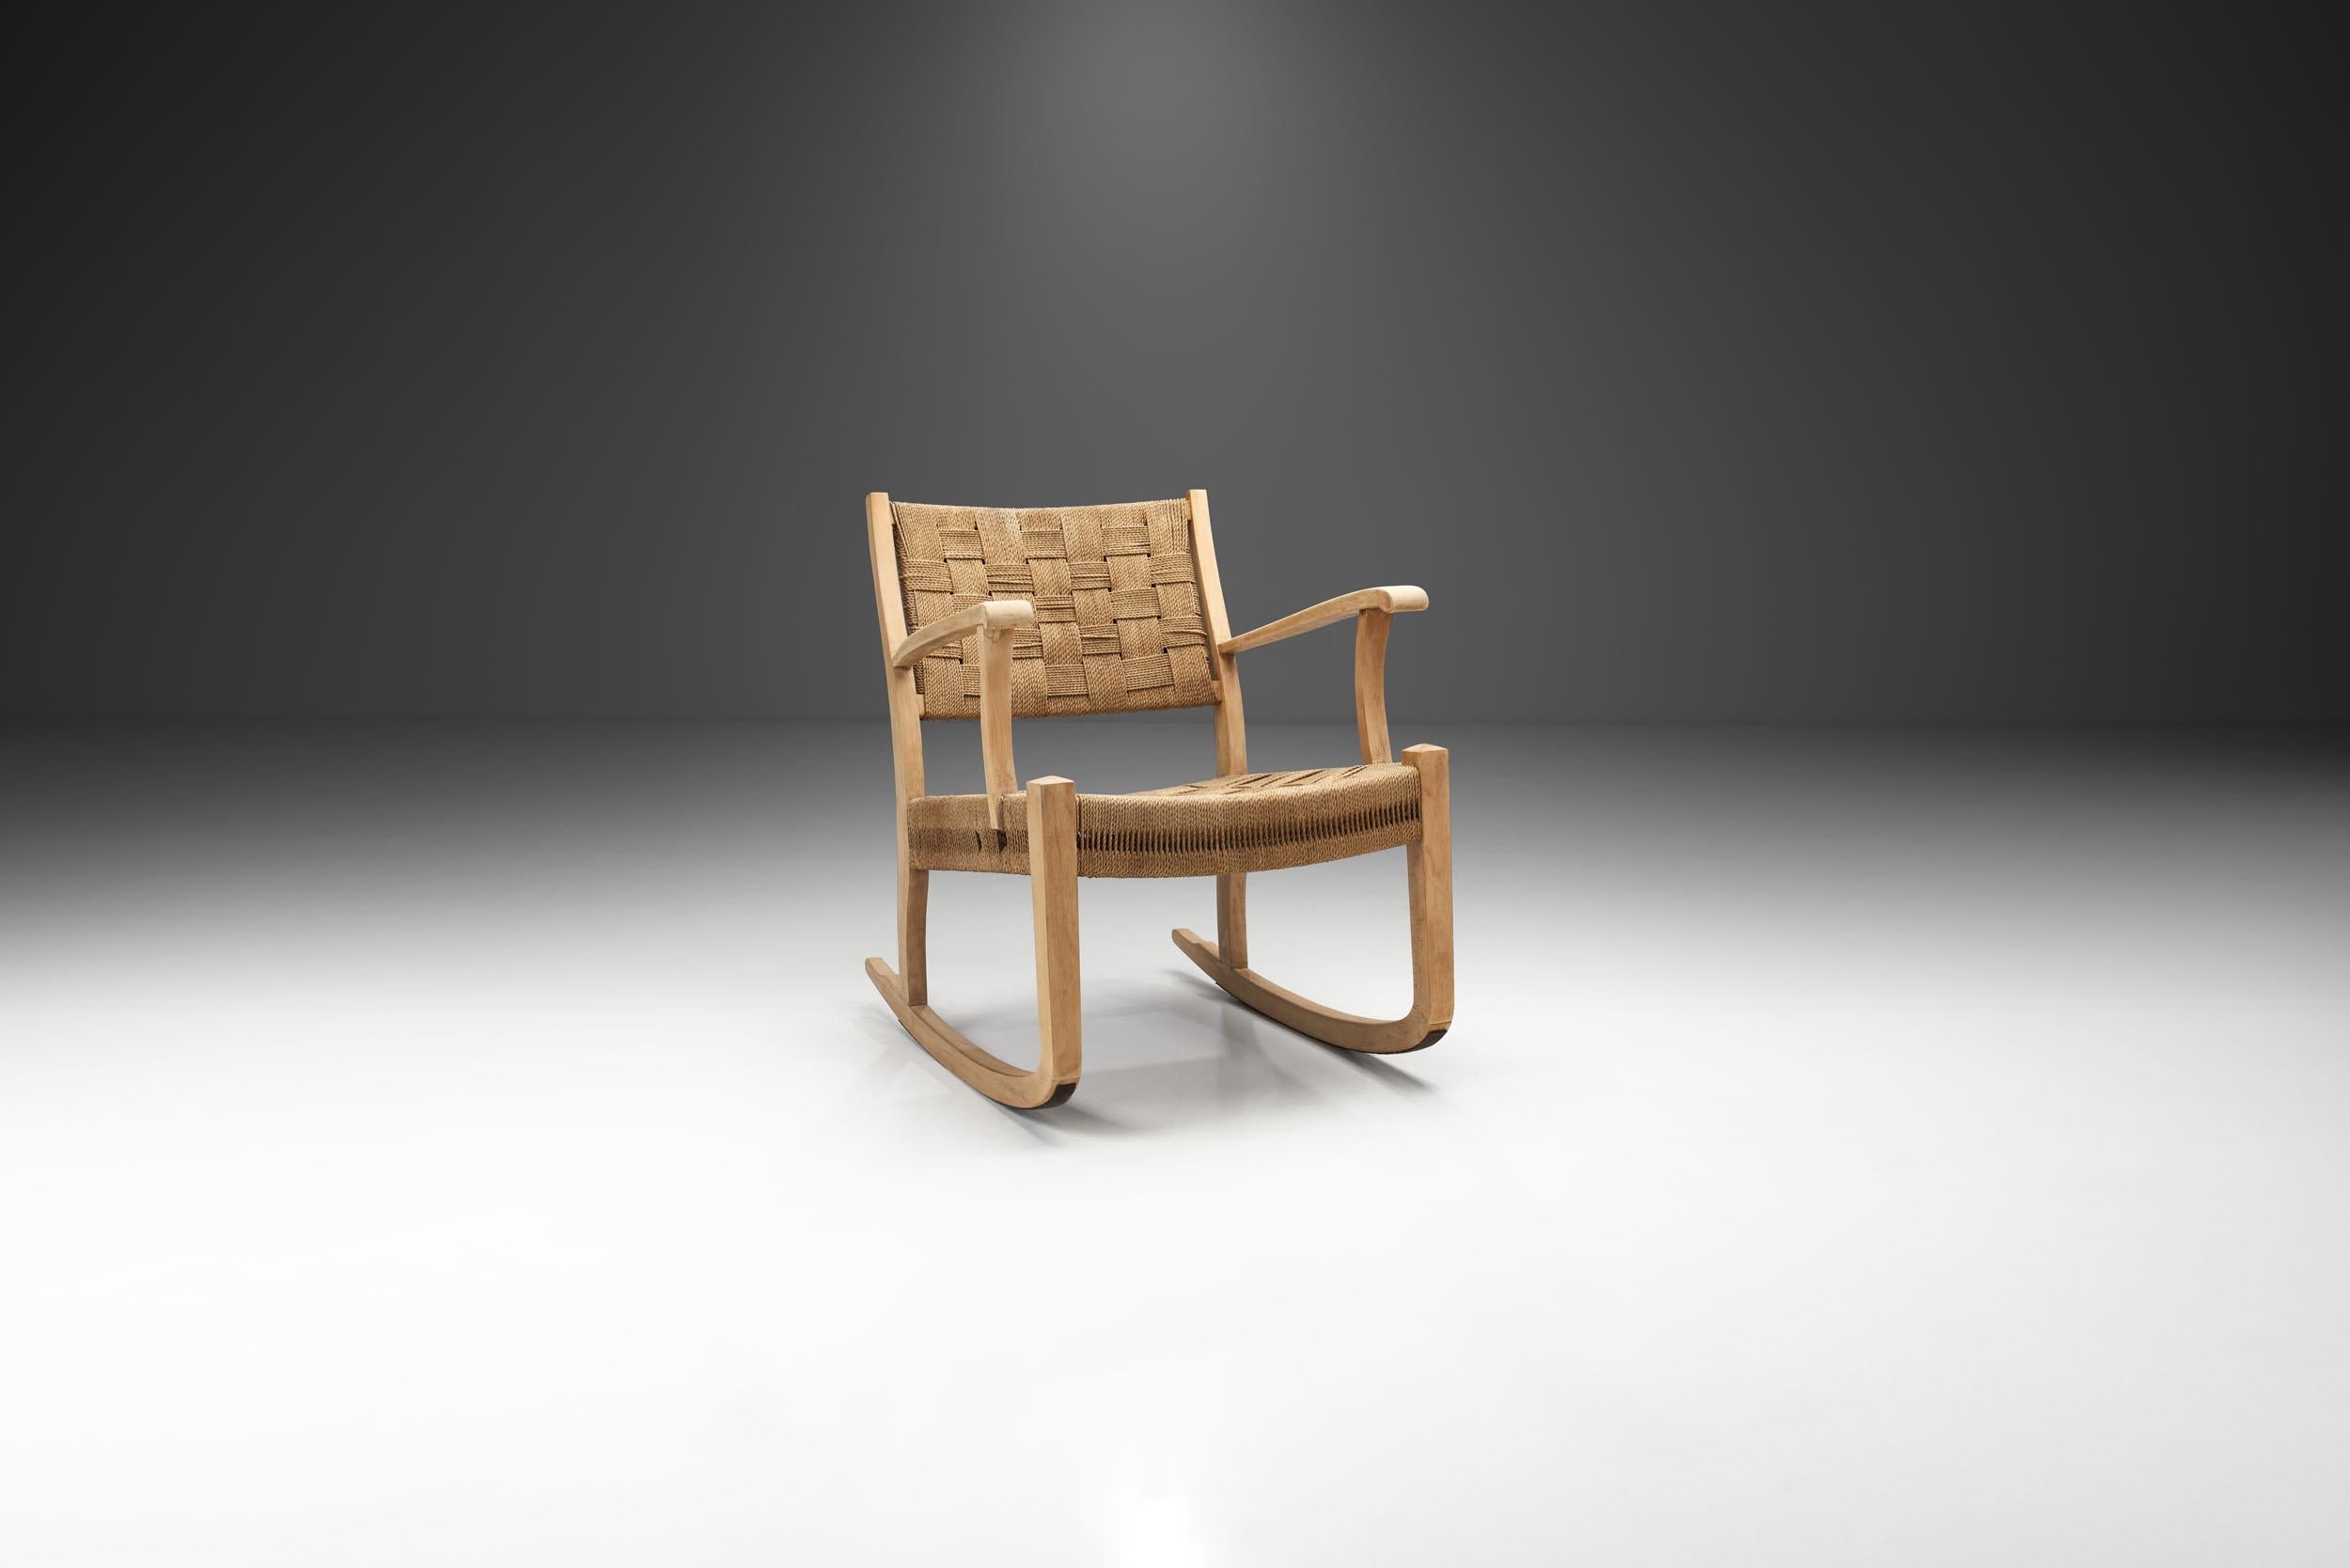 A beech rocking chair, suspended in seat and back with woven paper cord. Twisted paper cord woven across an open wood frame has been used to form the seats of Danish chairs since the 1940s but through the 1950s and 1960s paper cord became perhaps